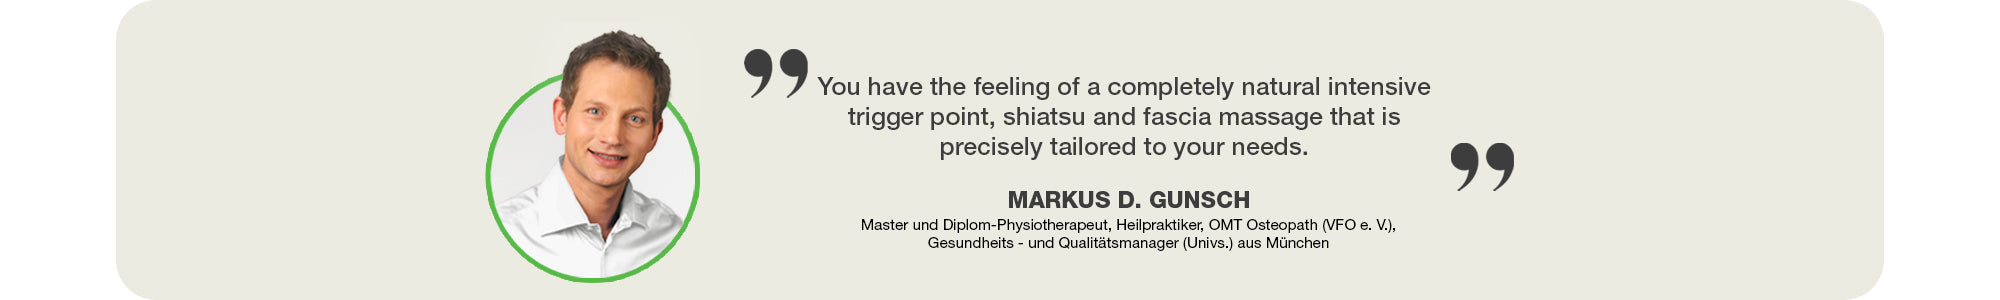 Expert review on Donnerberg massage device